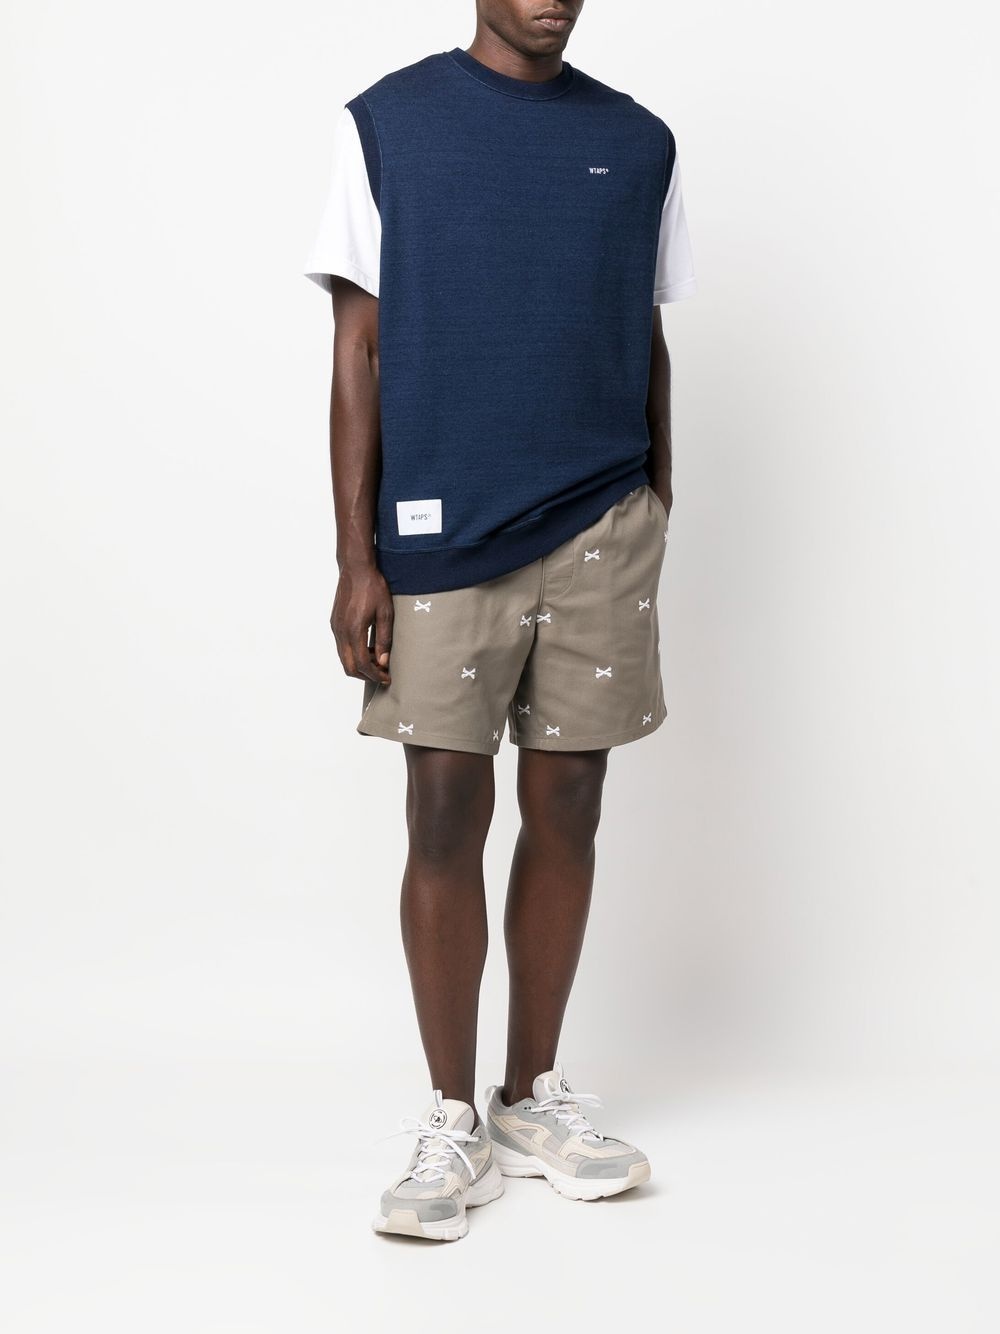 Seagull 01 embroidered track shorts - 2